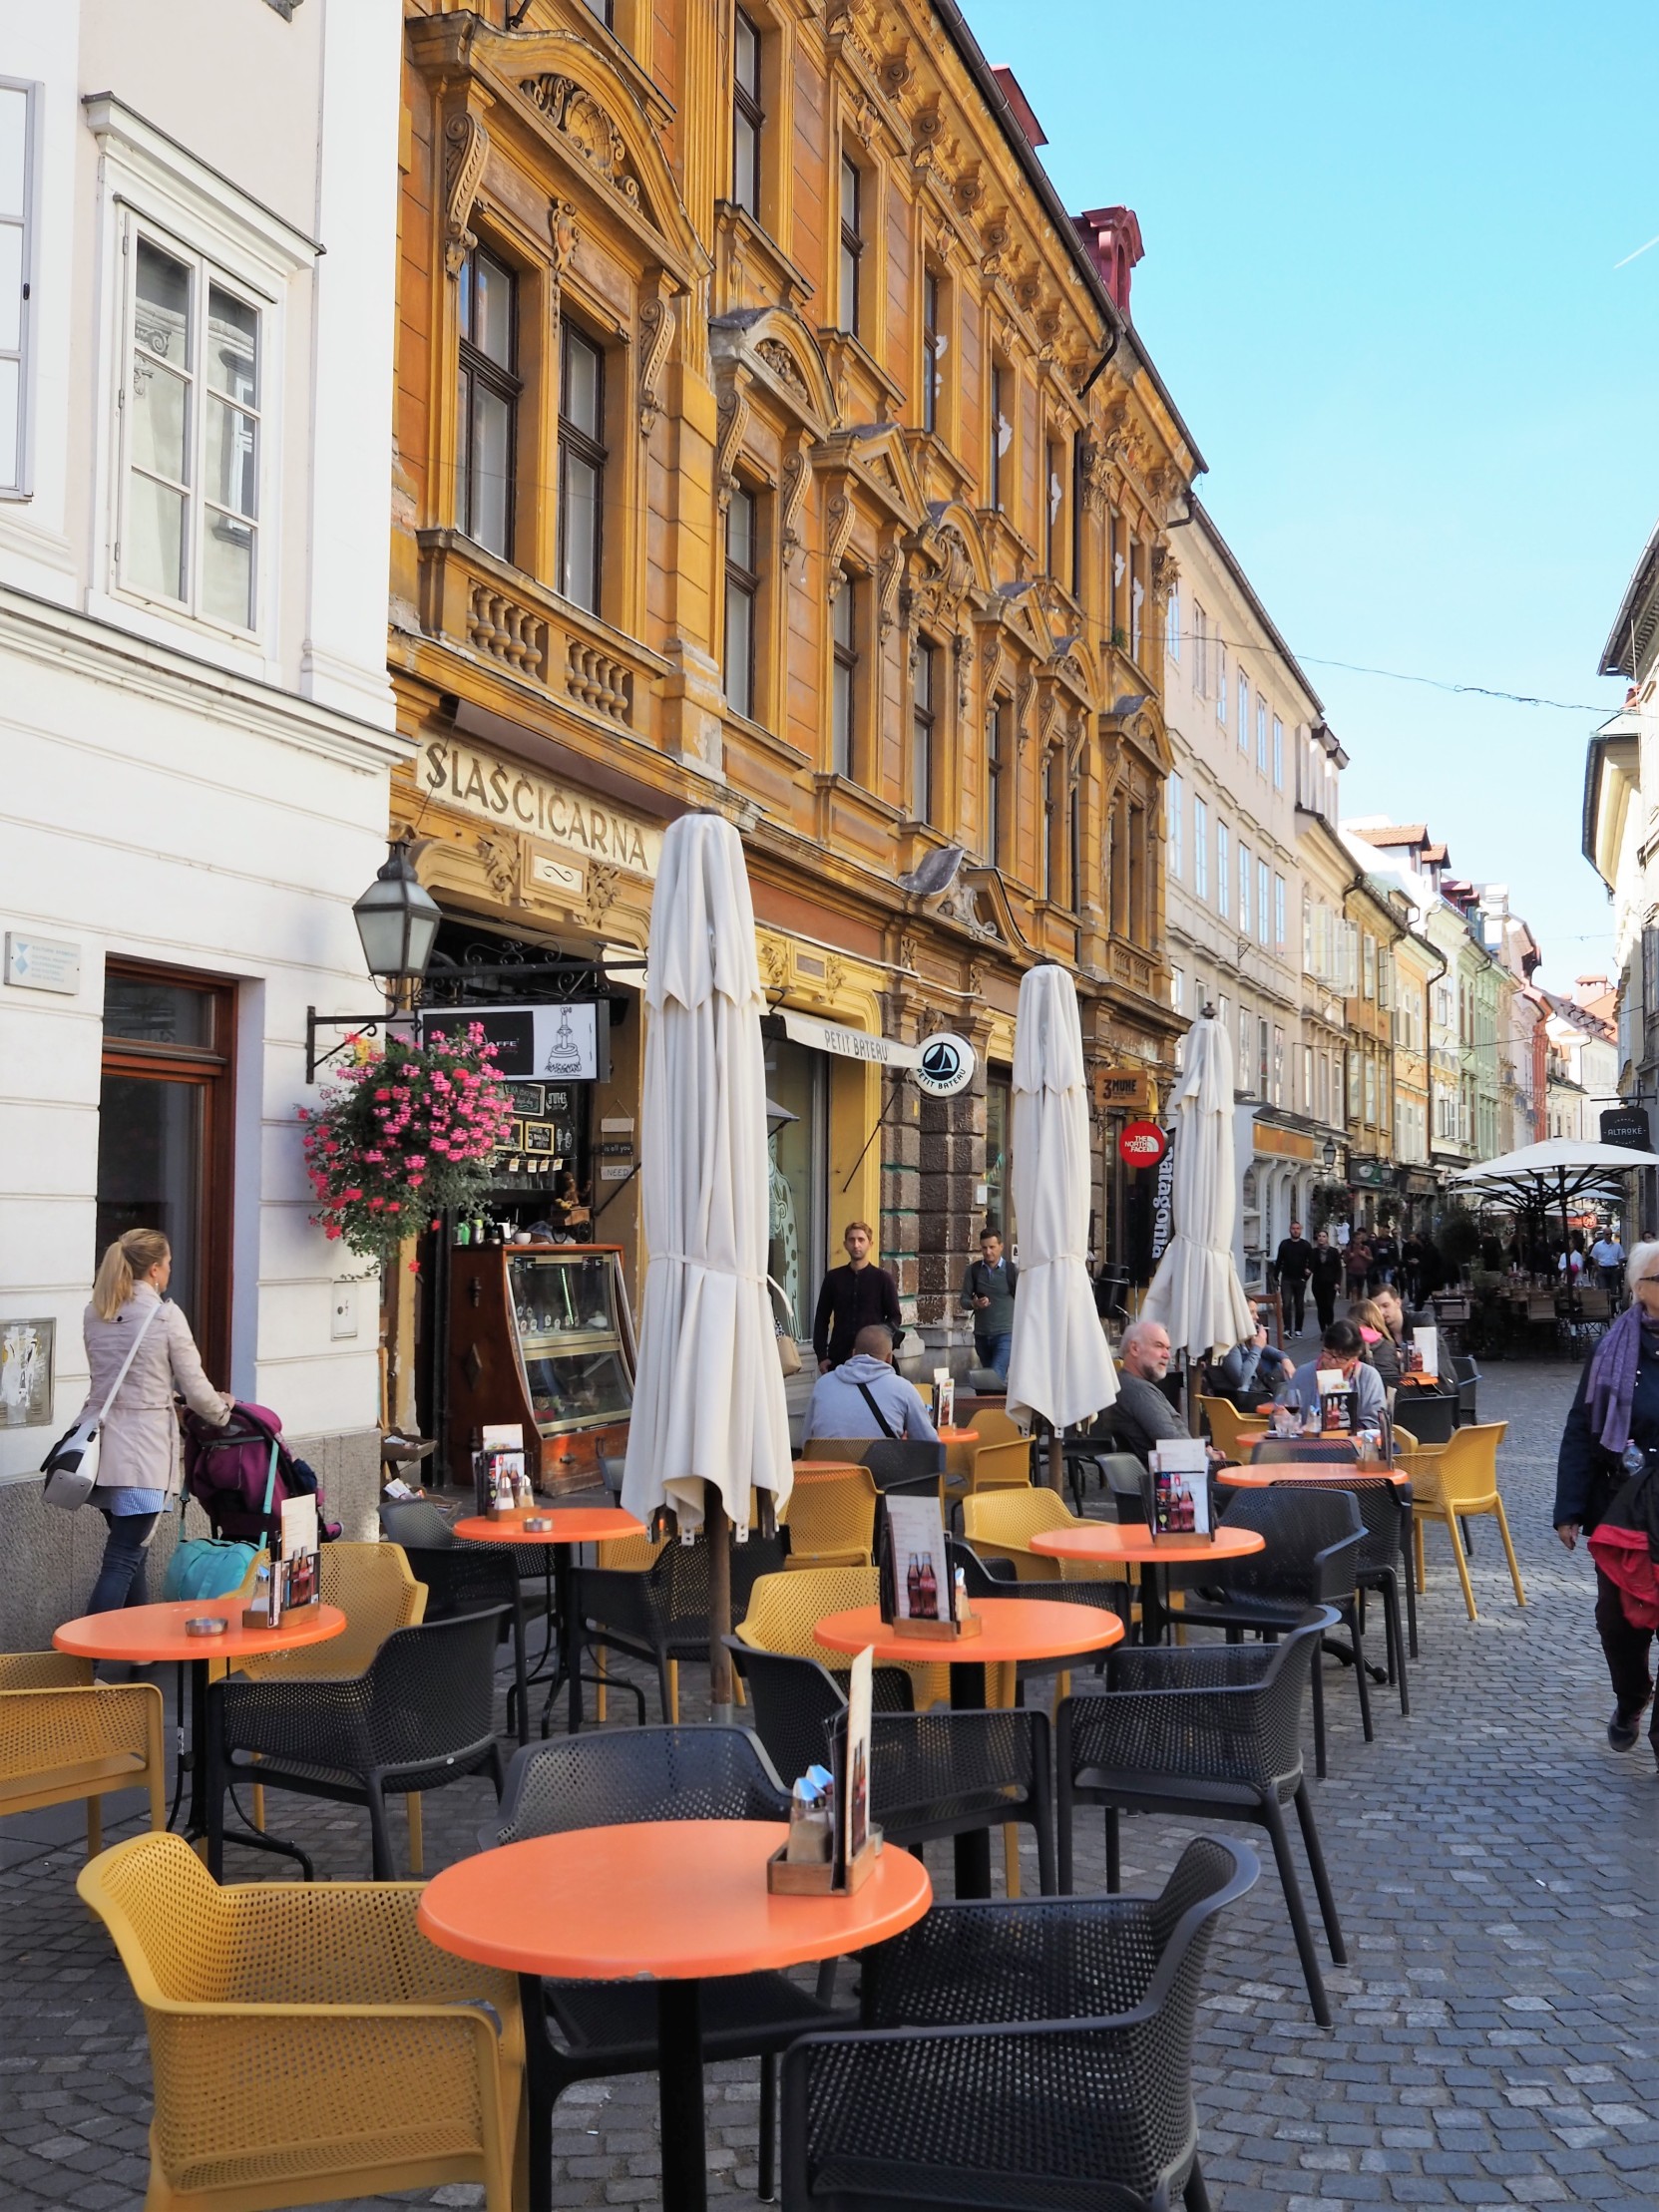 European city with outdor dining tables and Baroque architecture ljubljana slovenia